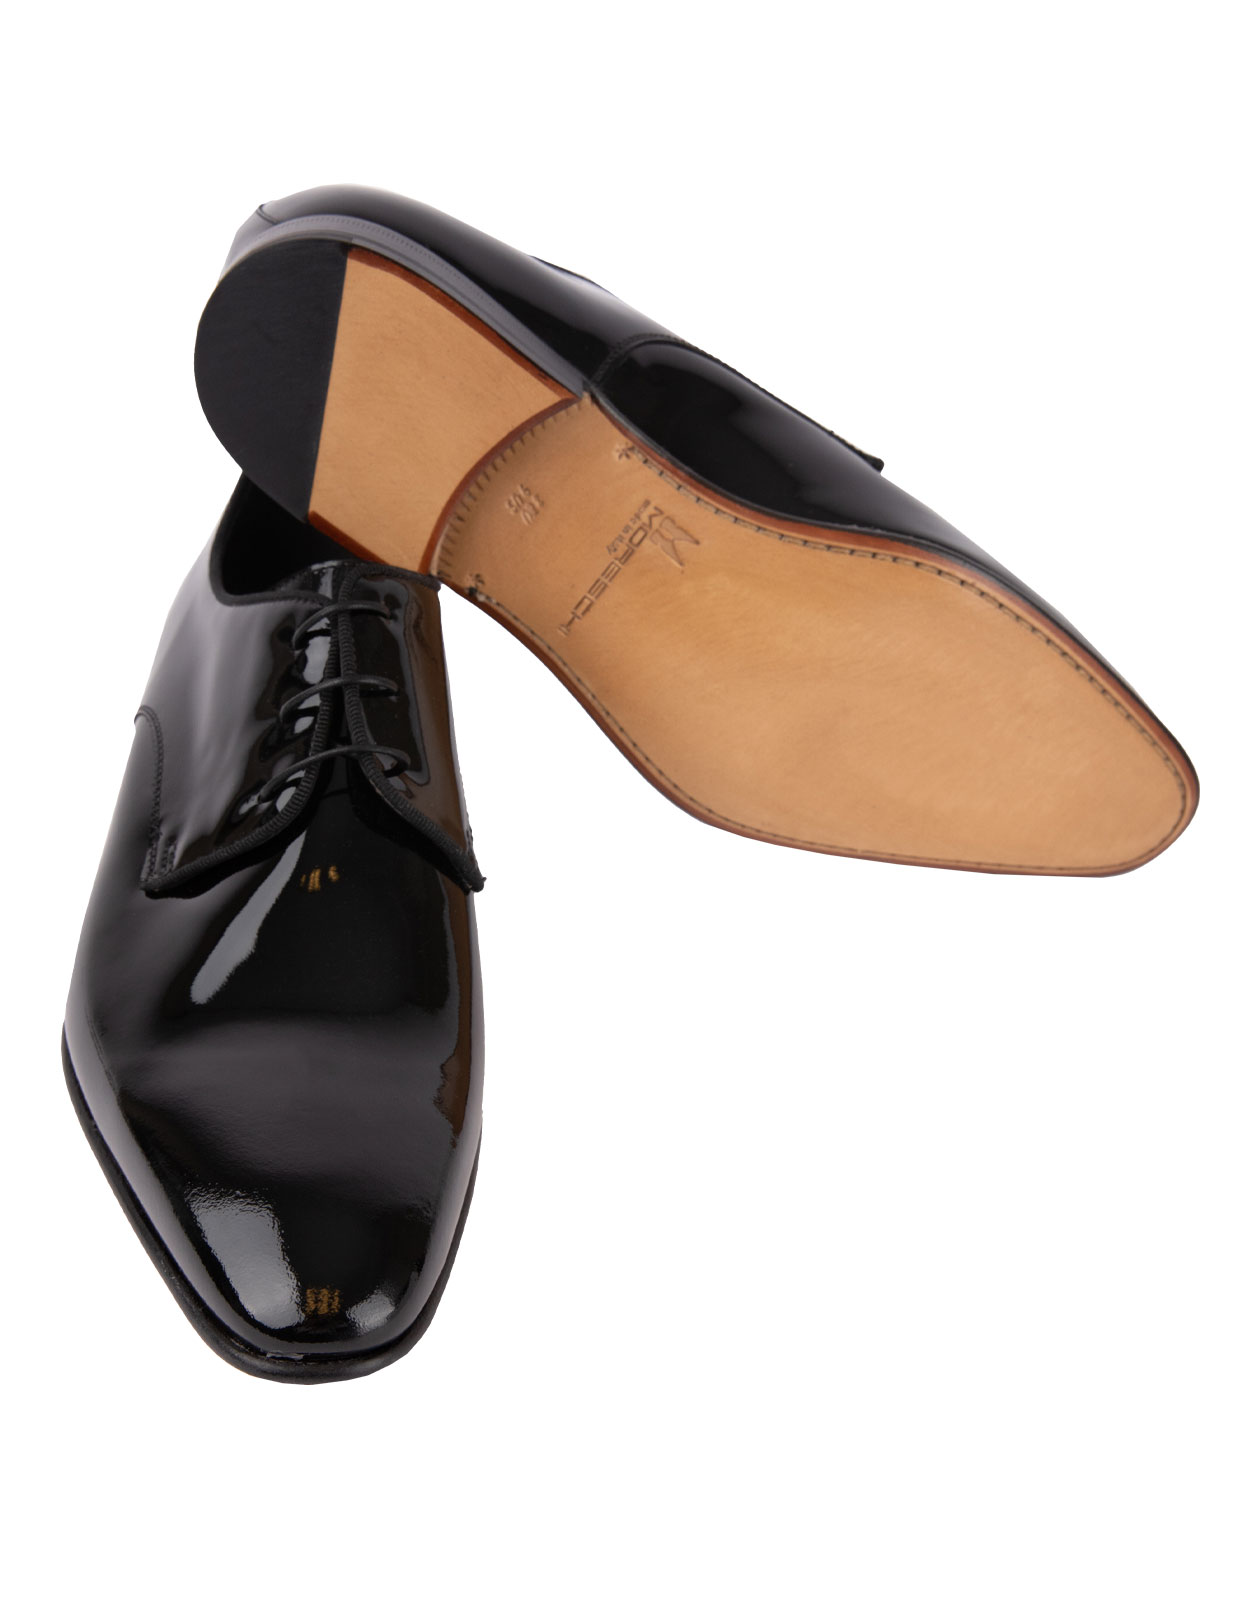 Lille Patent Leather Derby Shoes Black Stl 8